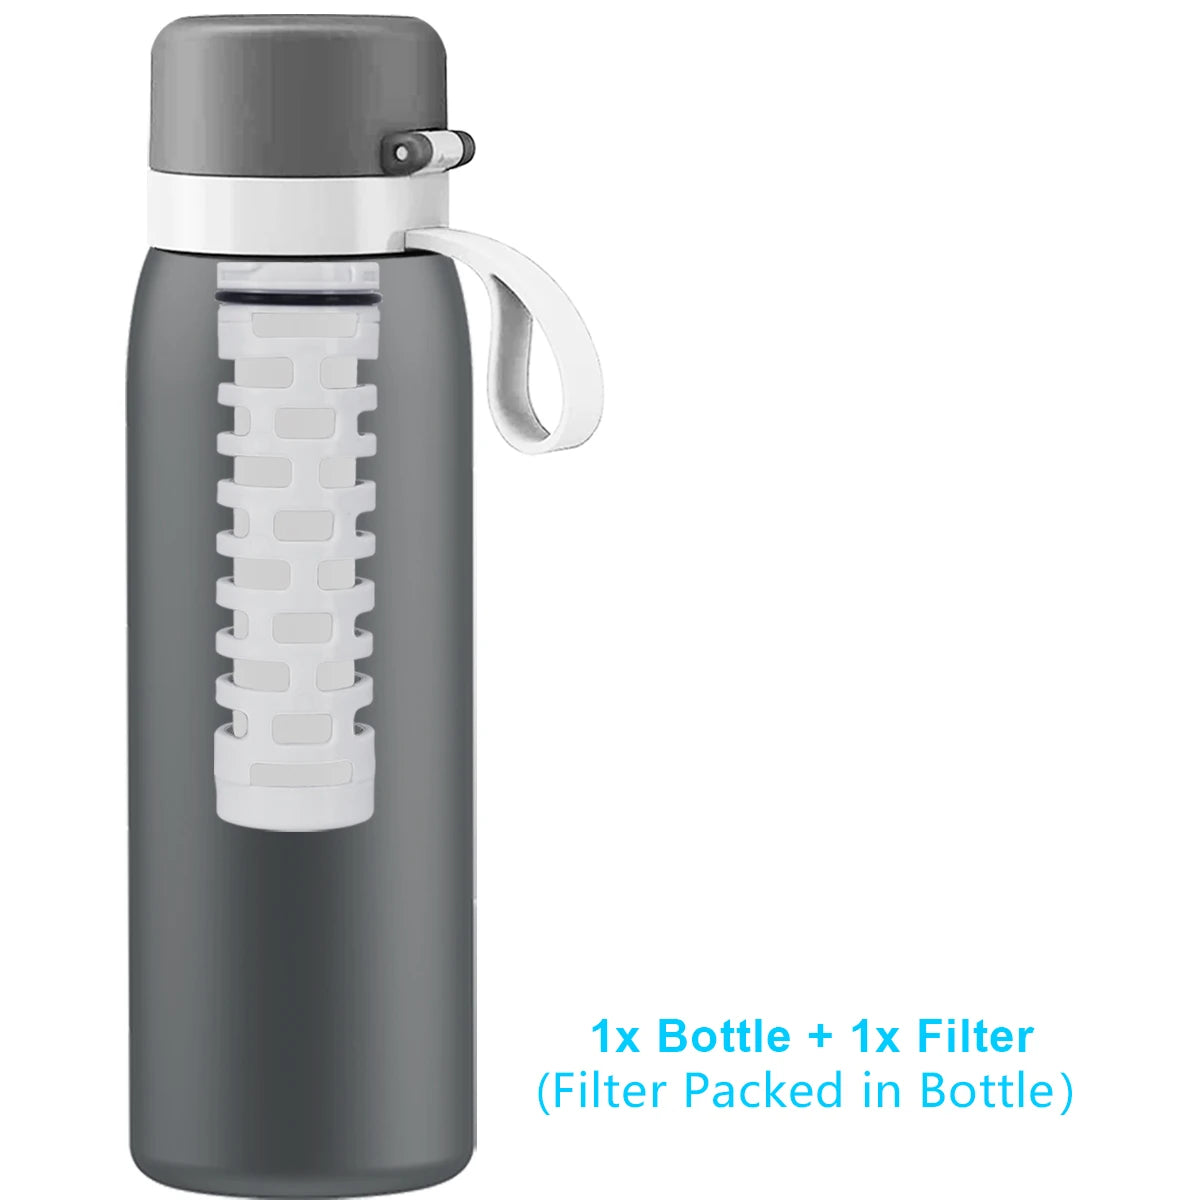 ALTHY PureHydrate Alkaline Ionizing Stainless Steel Water Bottle + Filters